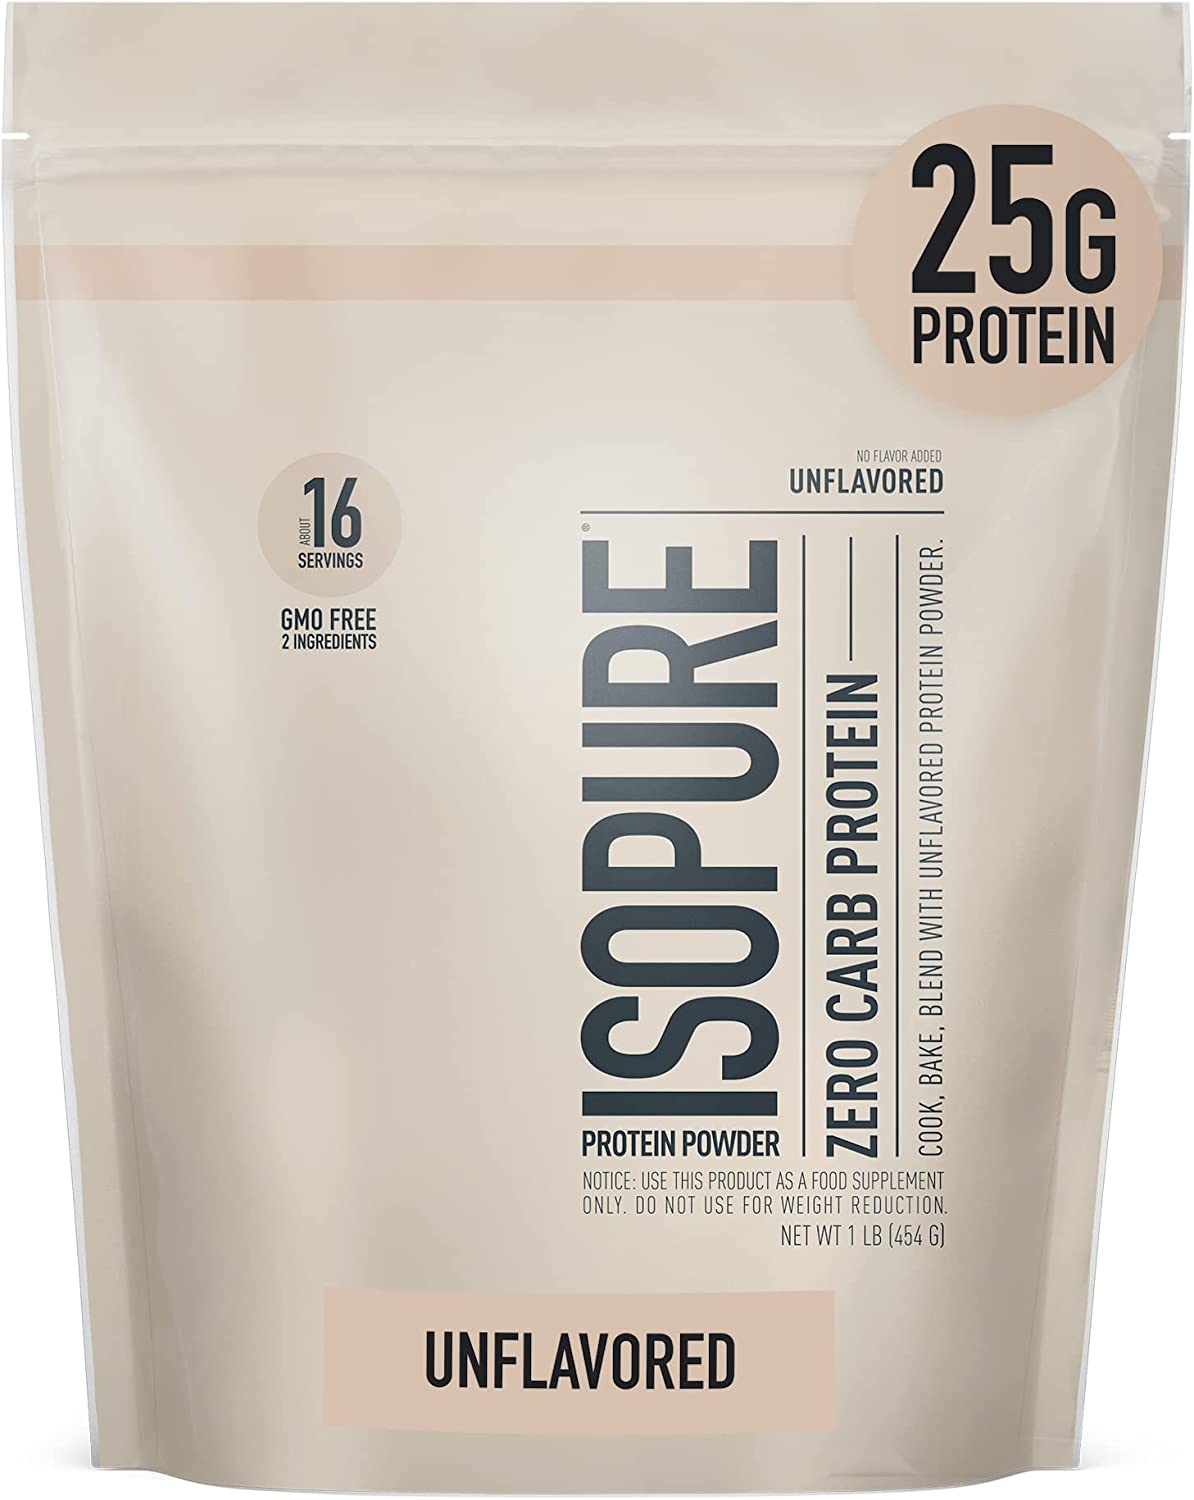 Isopure GMO-Free Whey Protein Isolate Powder, Unflavored